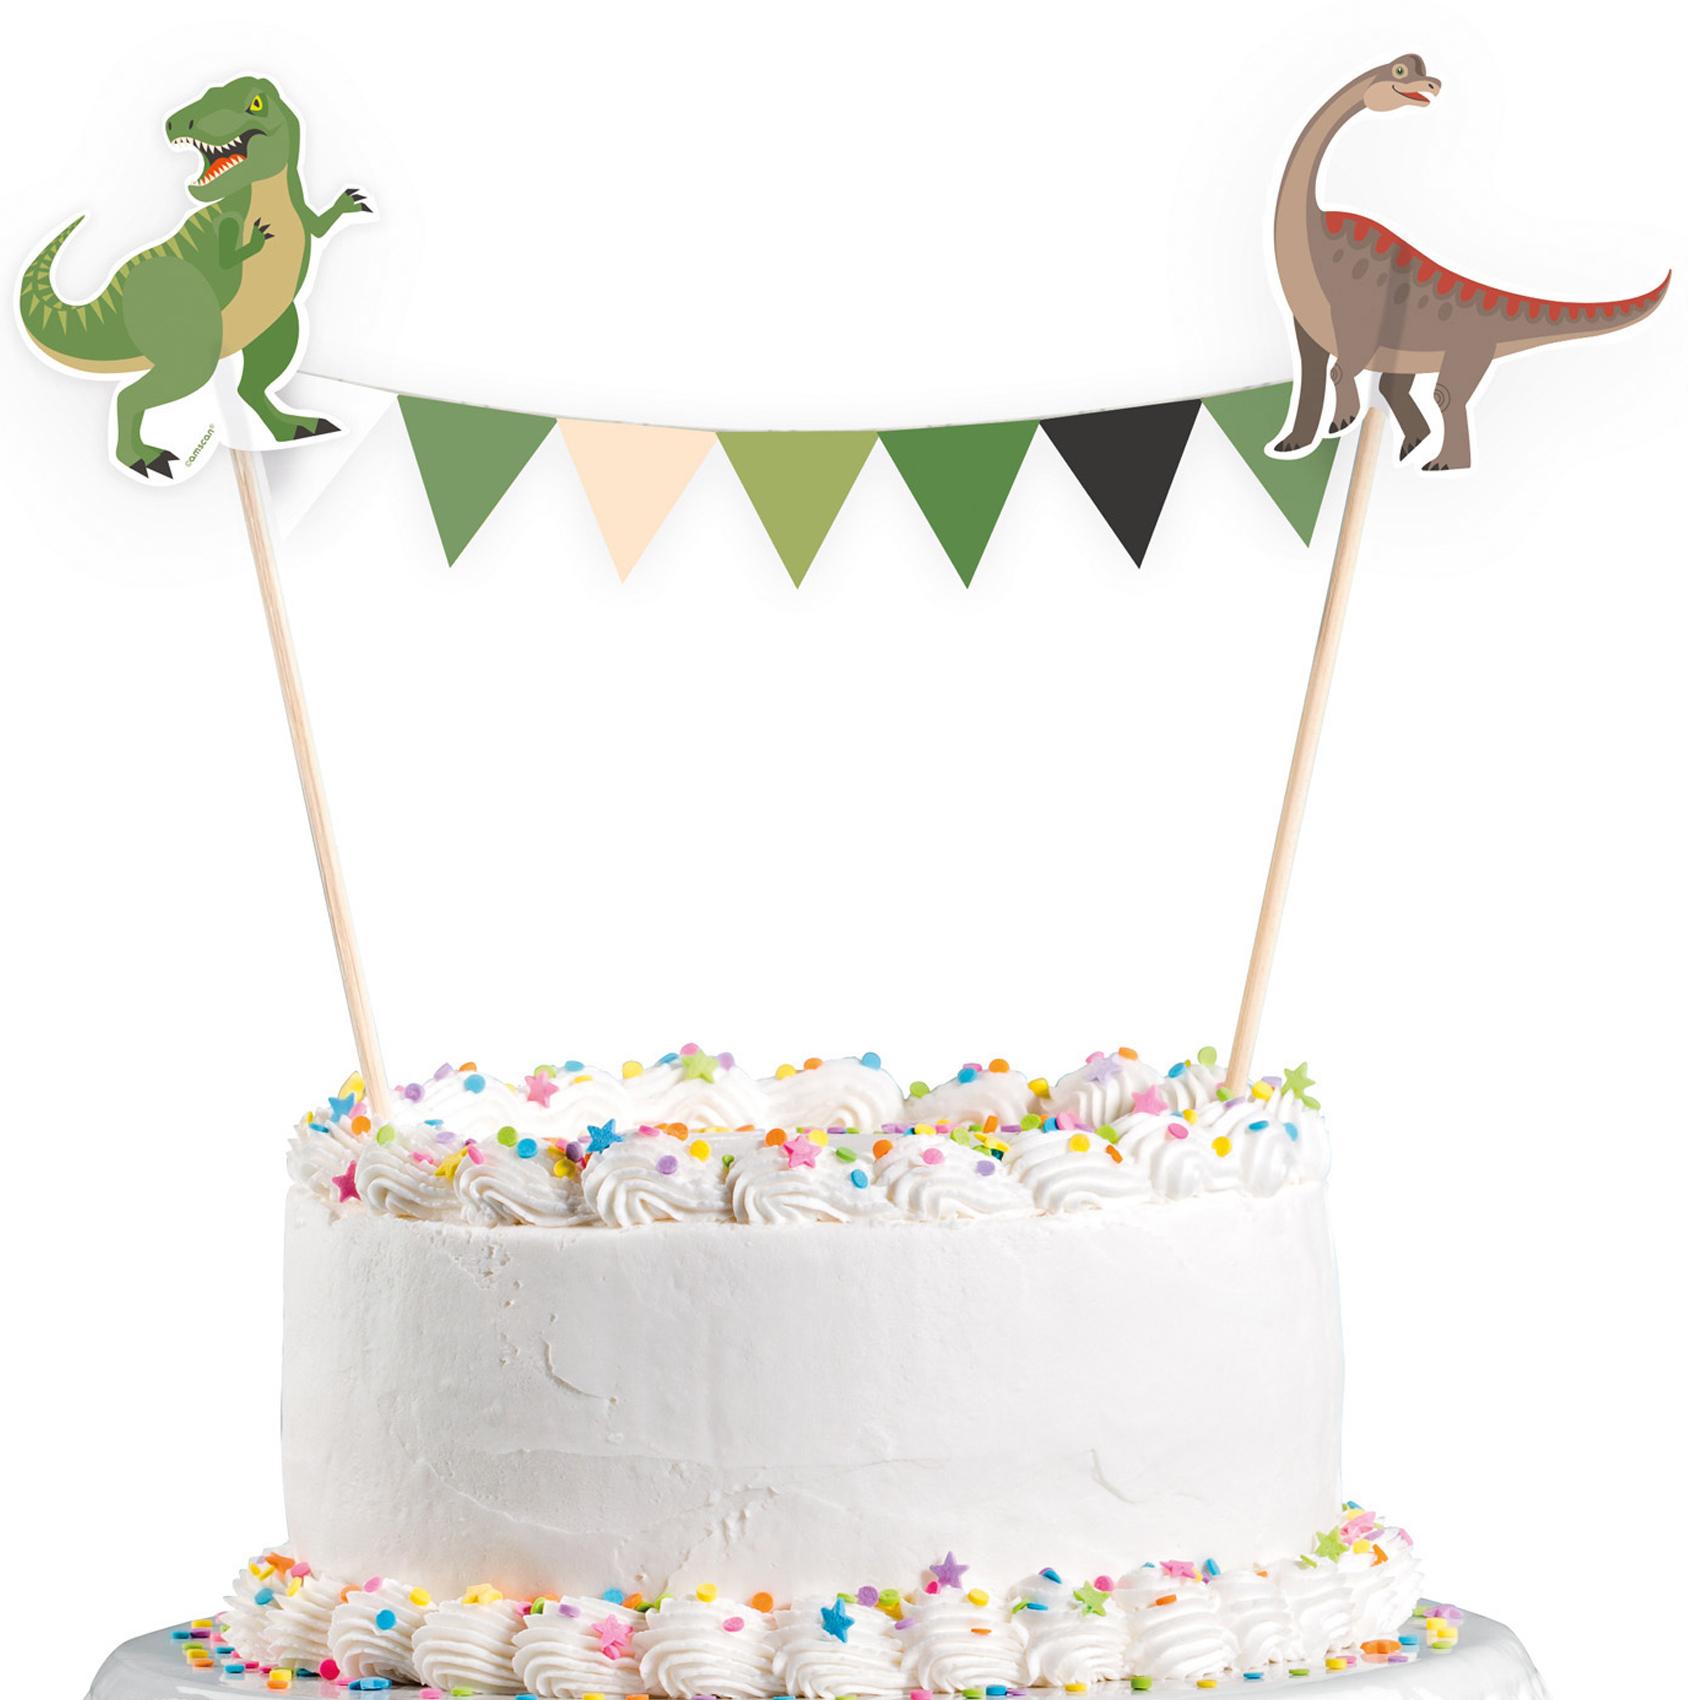 Happy Dinosaur Cake Bunting Party Accessories - Party Centre